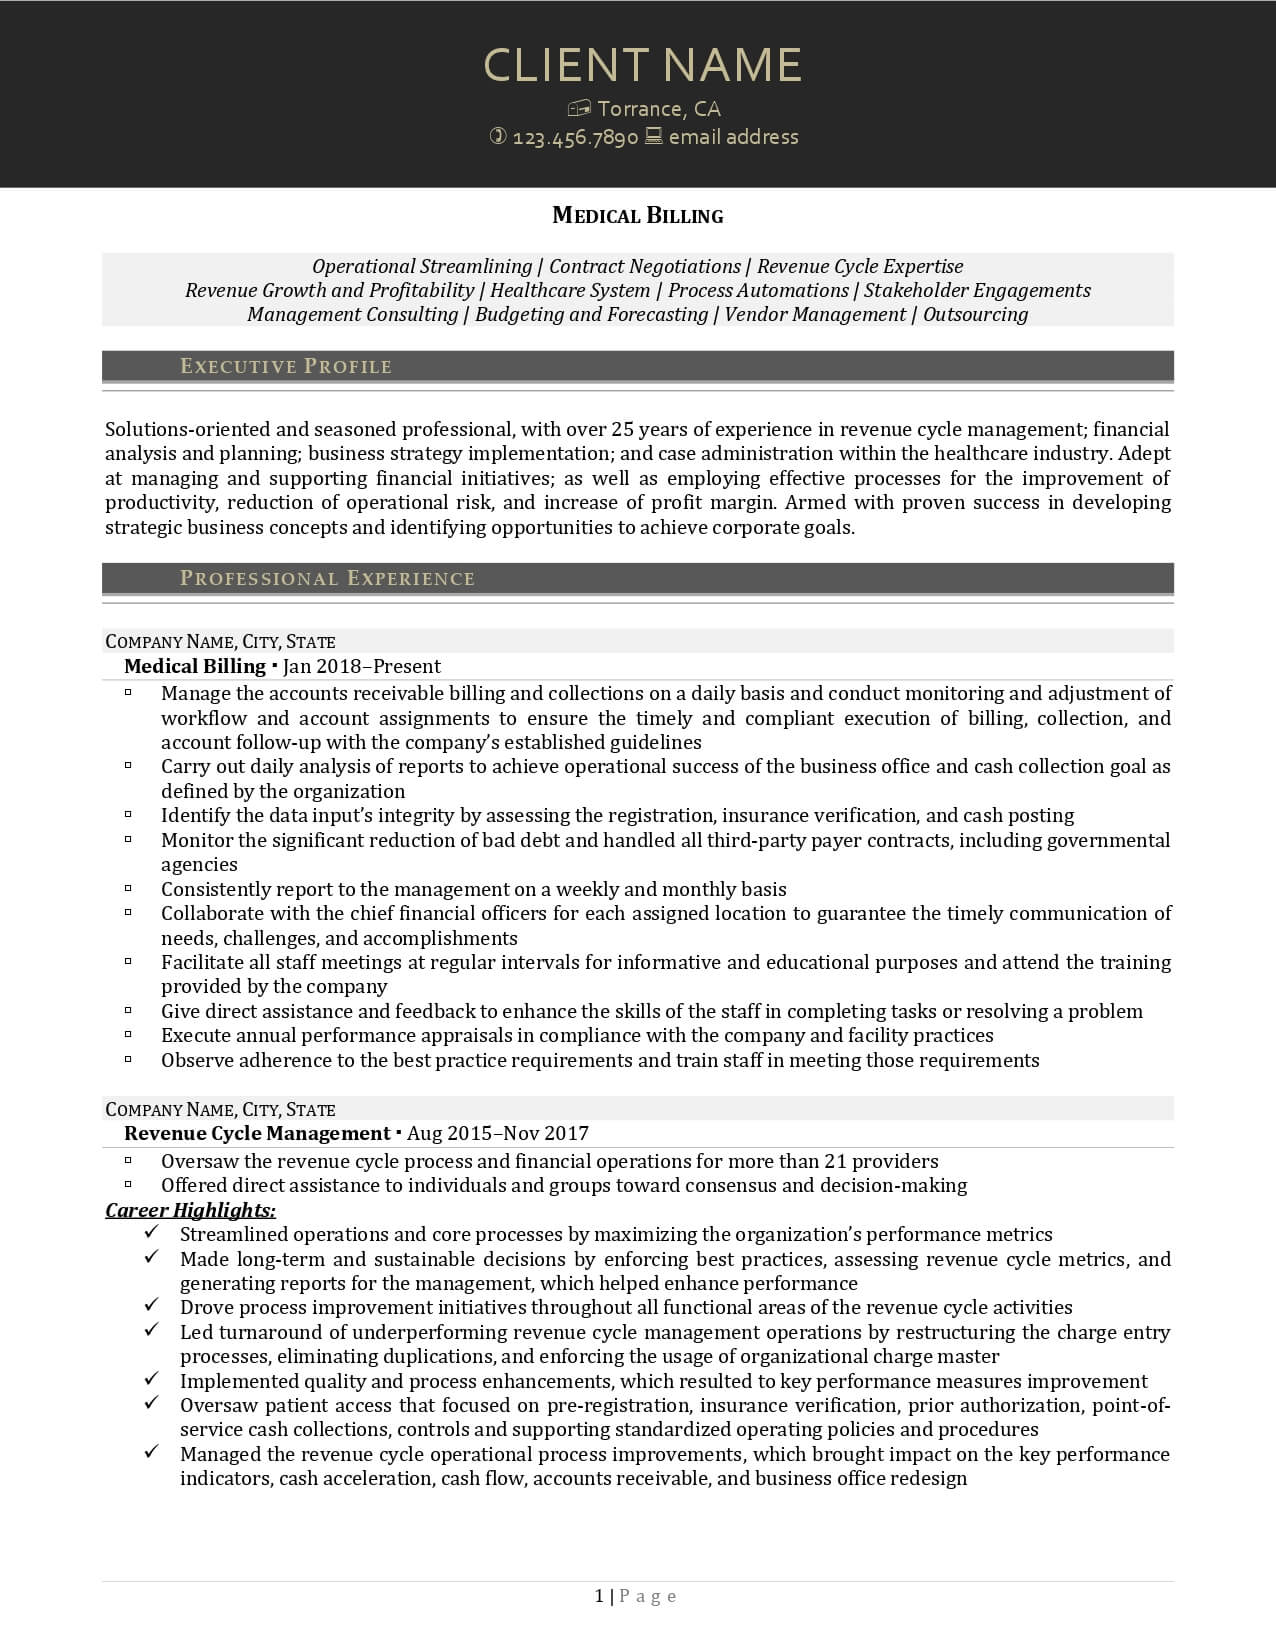 RM medical billing resume example page one